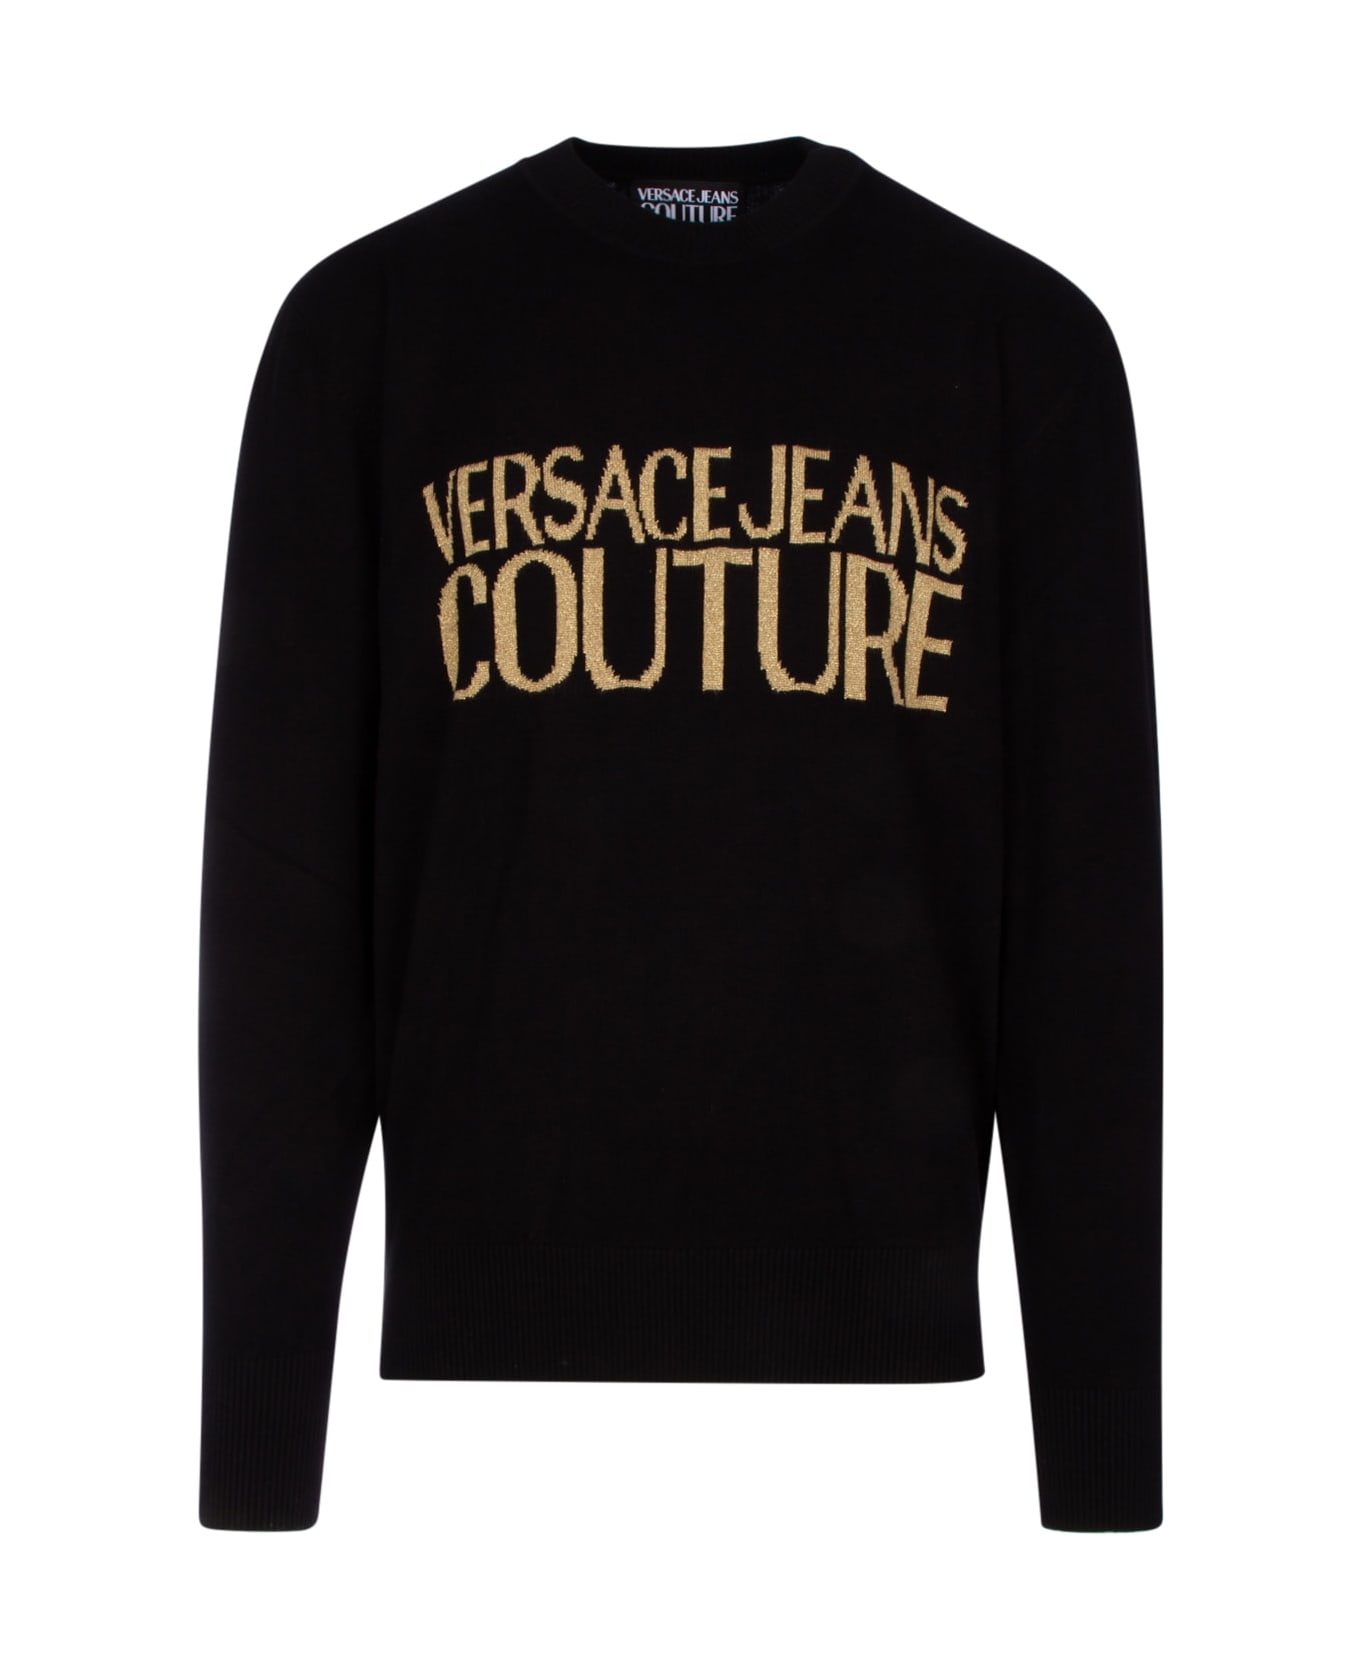 Versace Jeans Couture Maglieria - K42 フリース